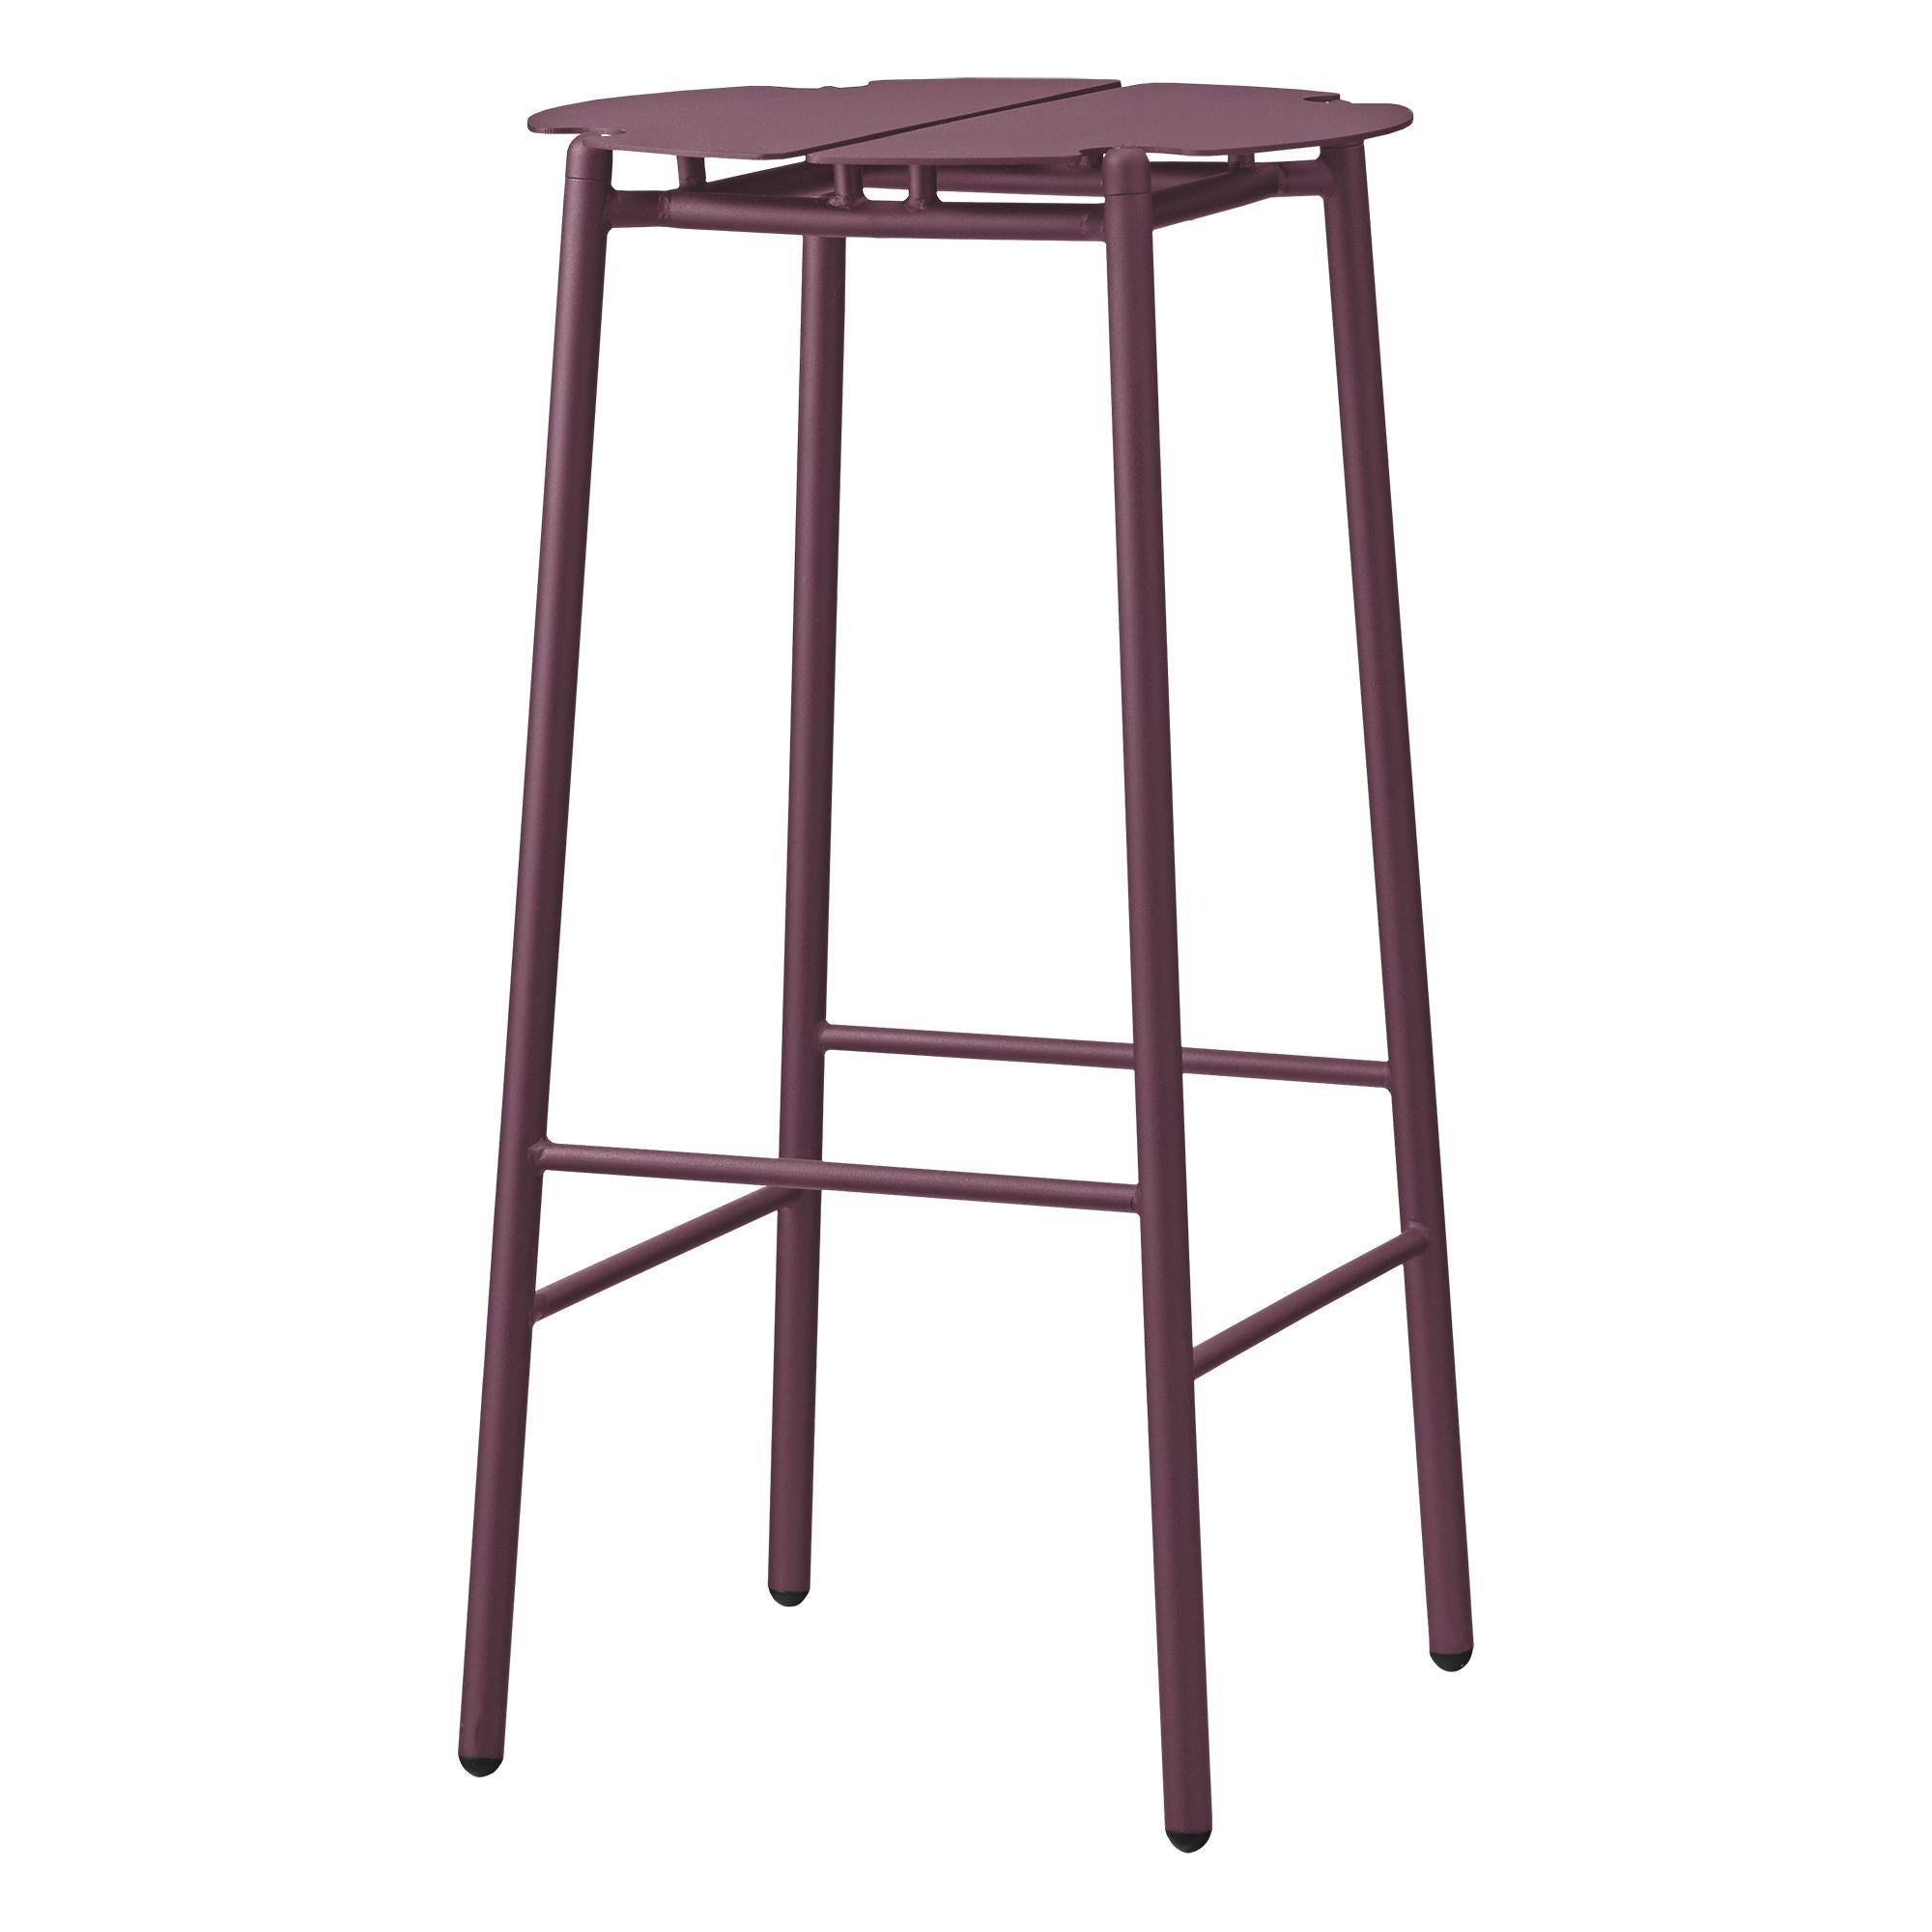 Bordeux minimalist bar stool
Dimensions: Diameter 38 x height 75 cm 
Materials: Steel w. Matte powder coating & aluminum w. Matte powder coating.
Available in colors: Taupe, bordeaux, forest, ginger bread, black and, black and gold.

Create a